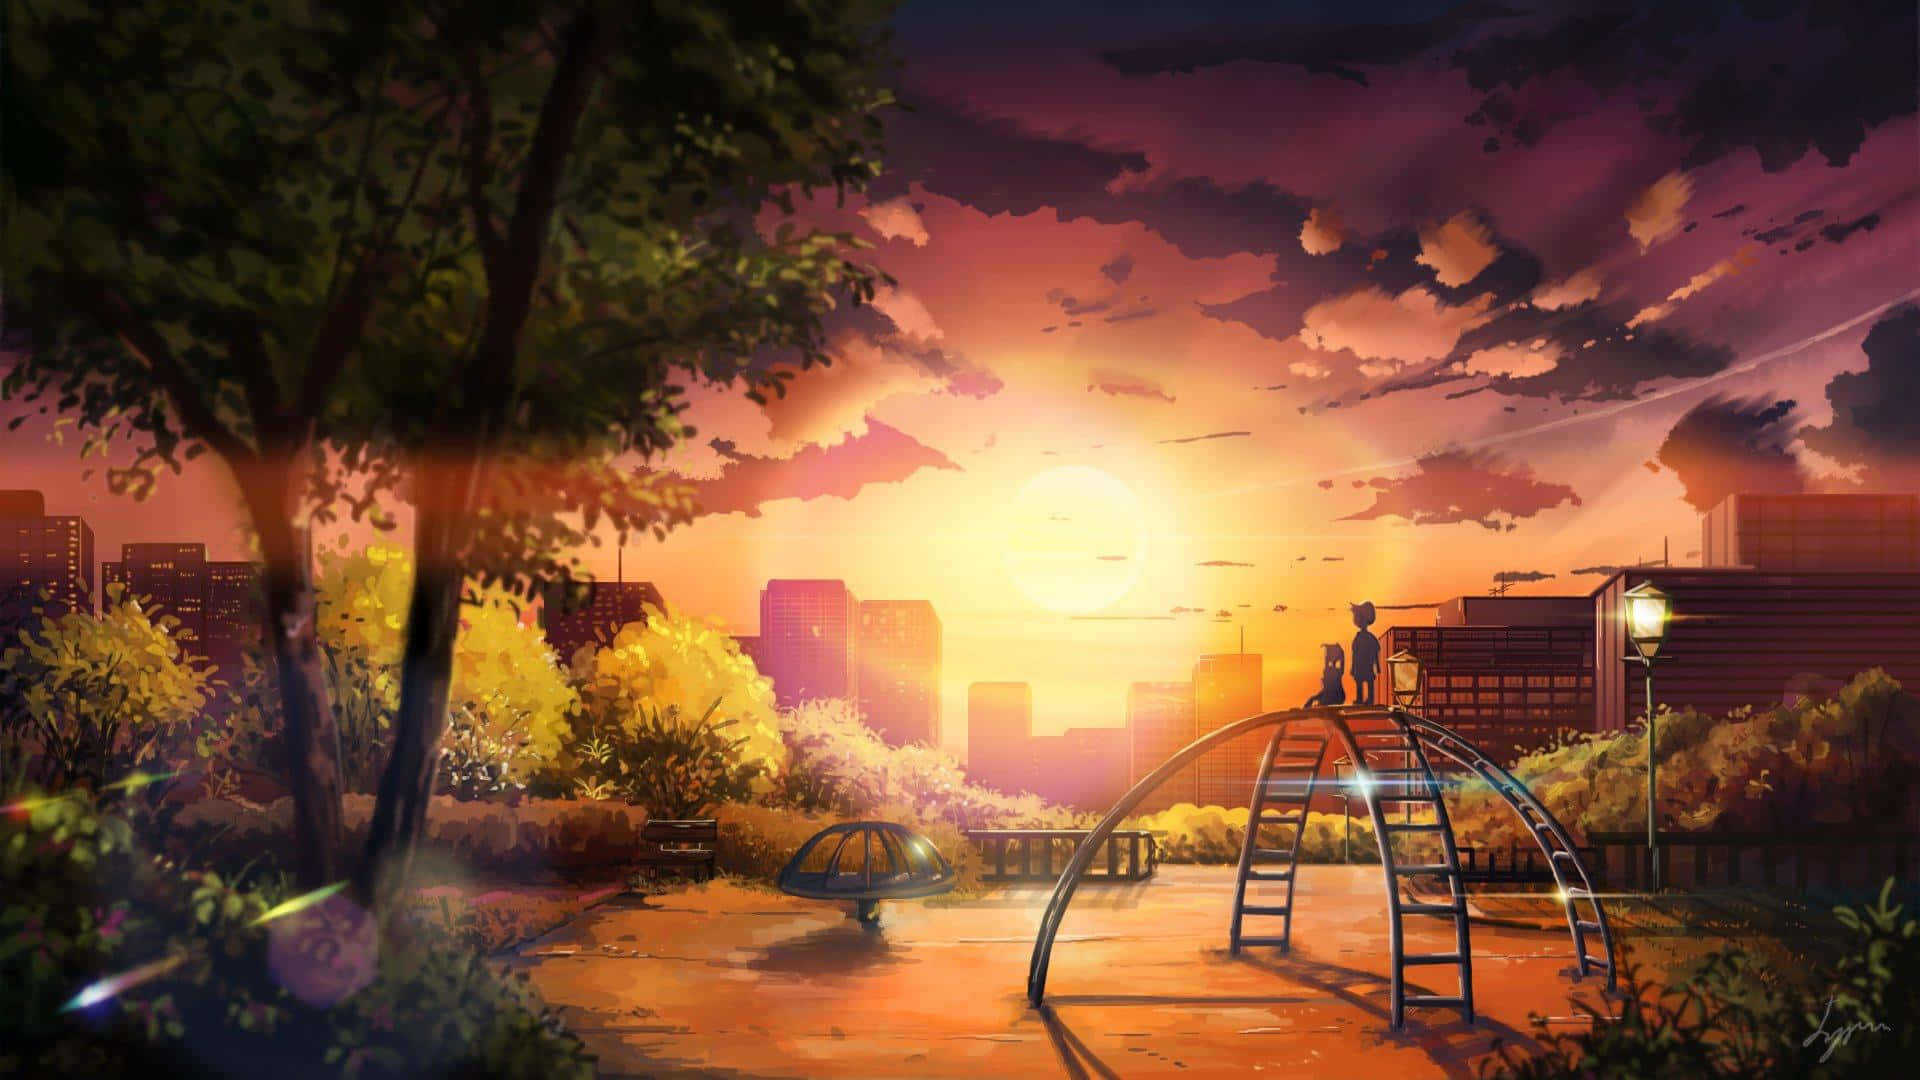 5,123 Anime Sunset Images, Stock Photos & Vectors | Shutterstock